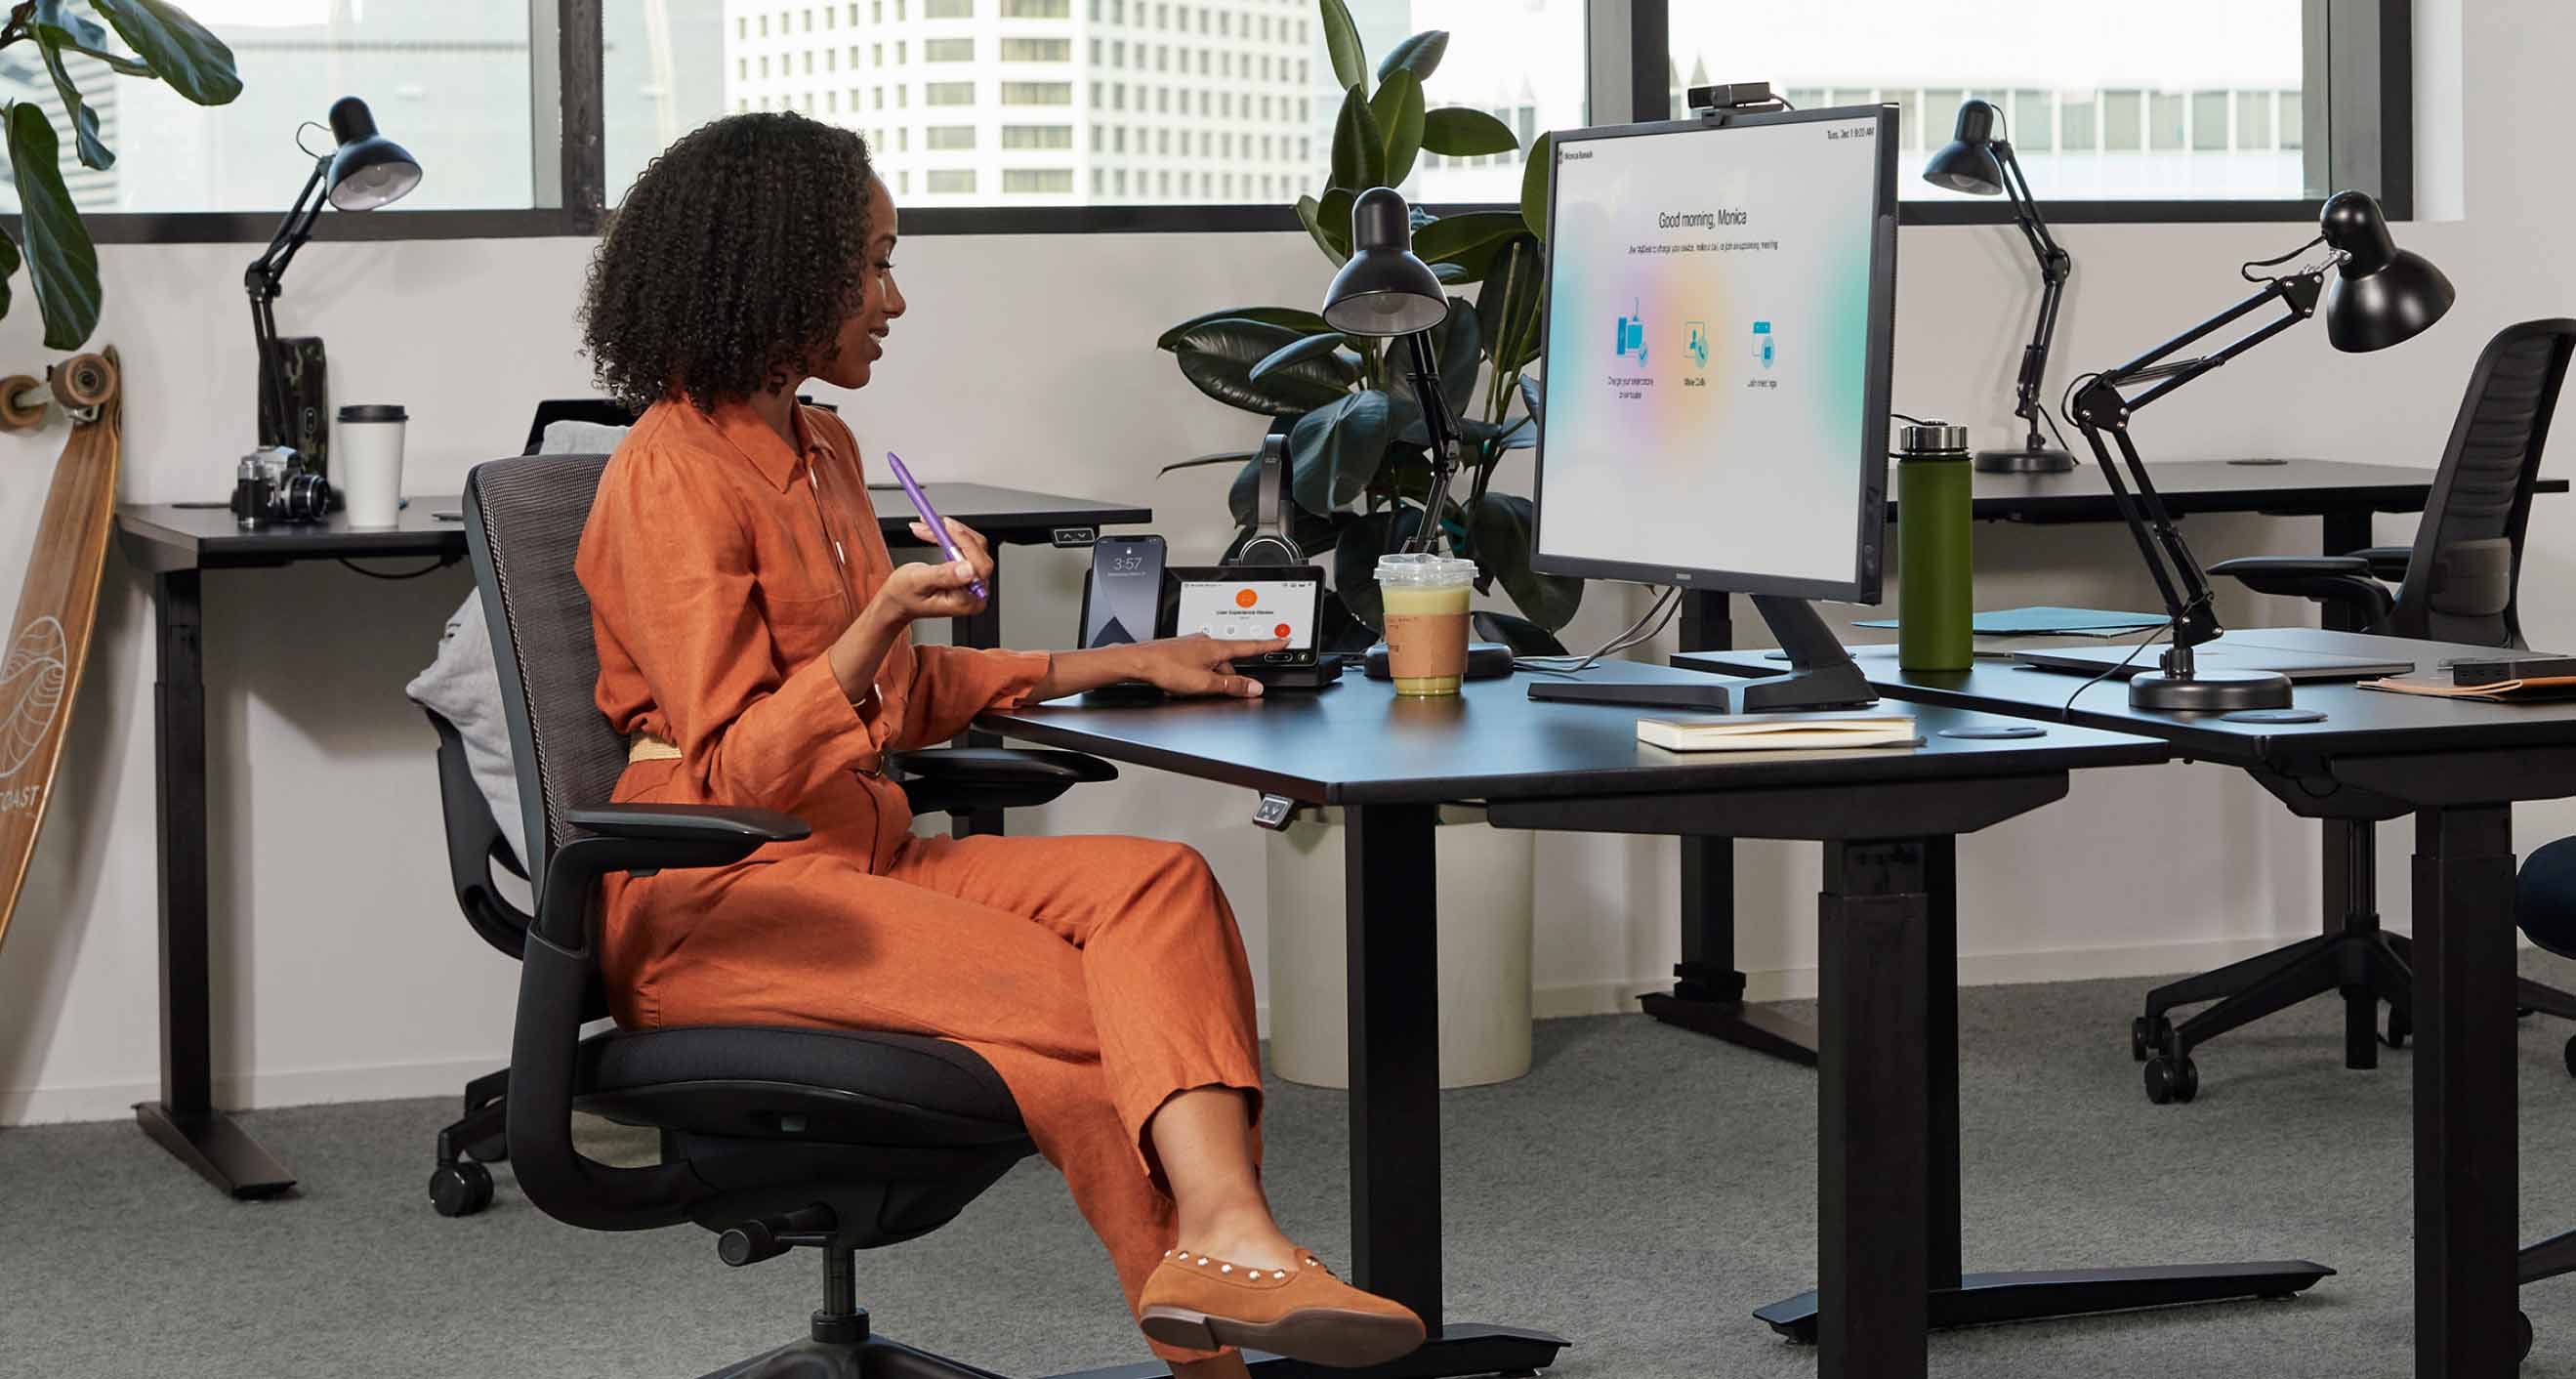 A financial expert uses Webex to connect with clients securely